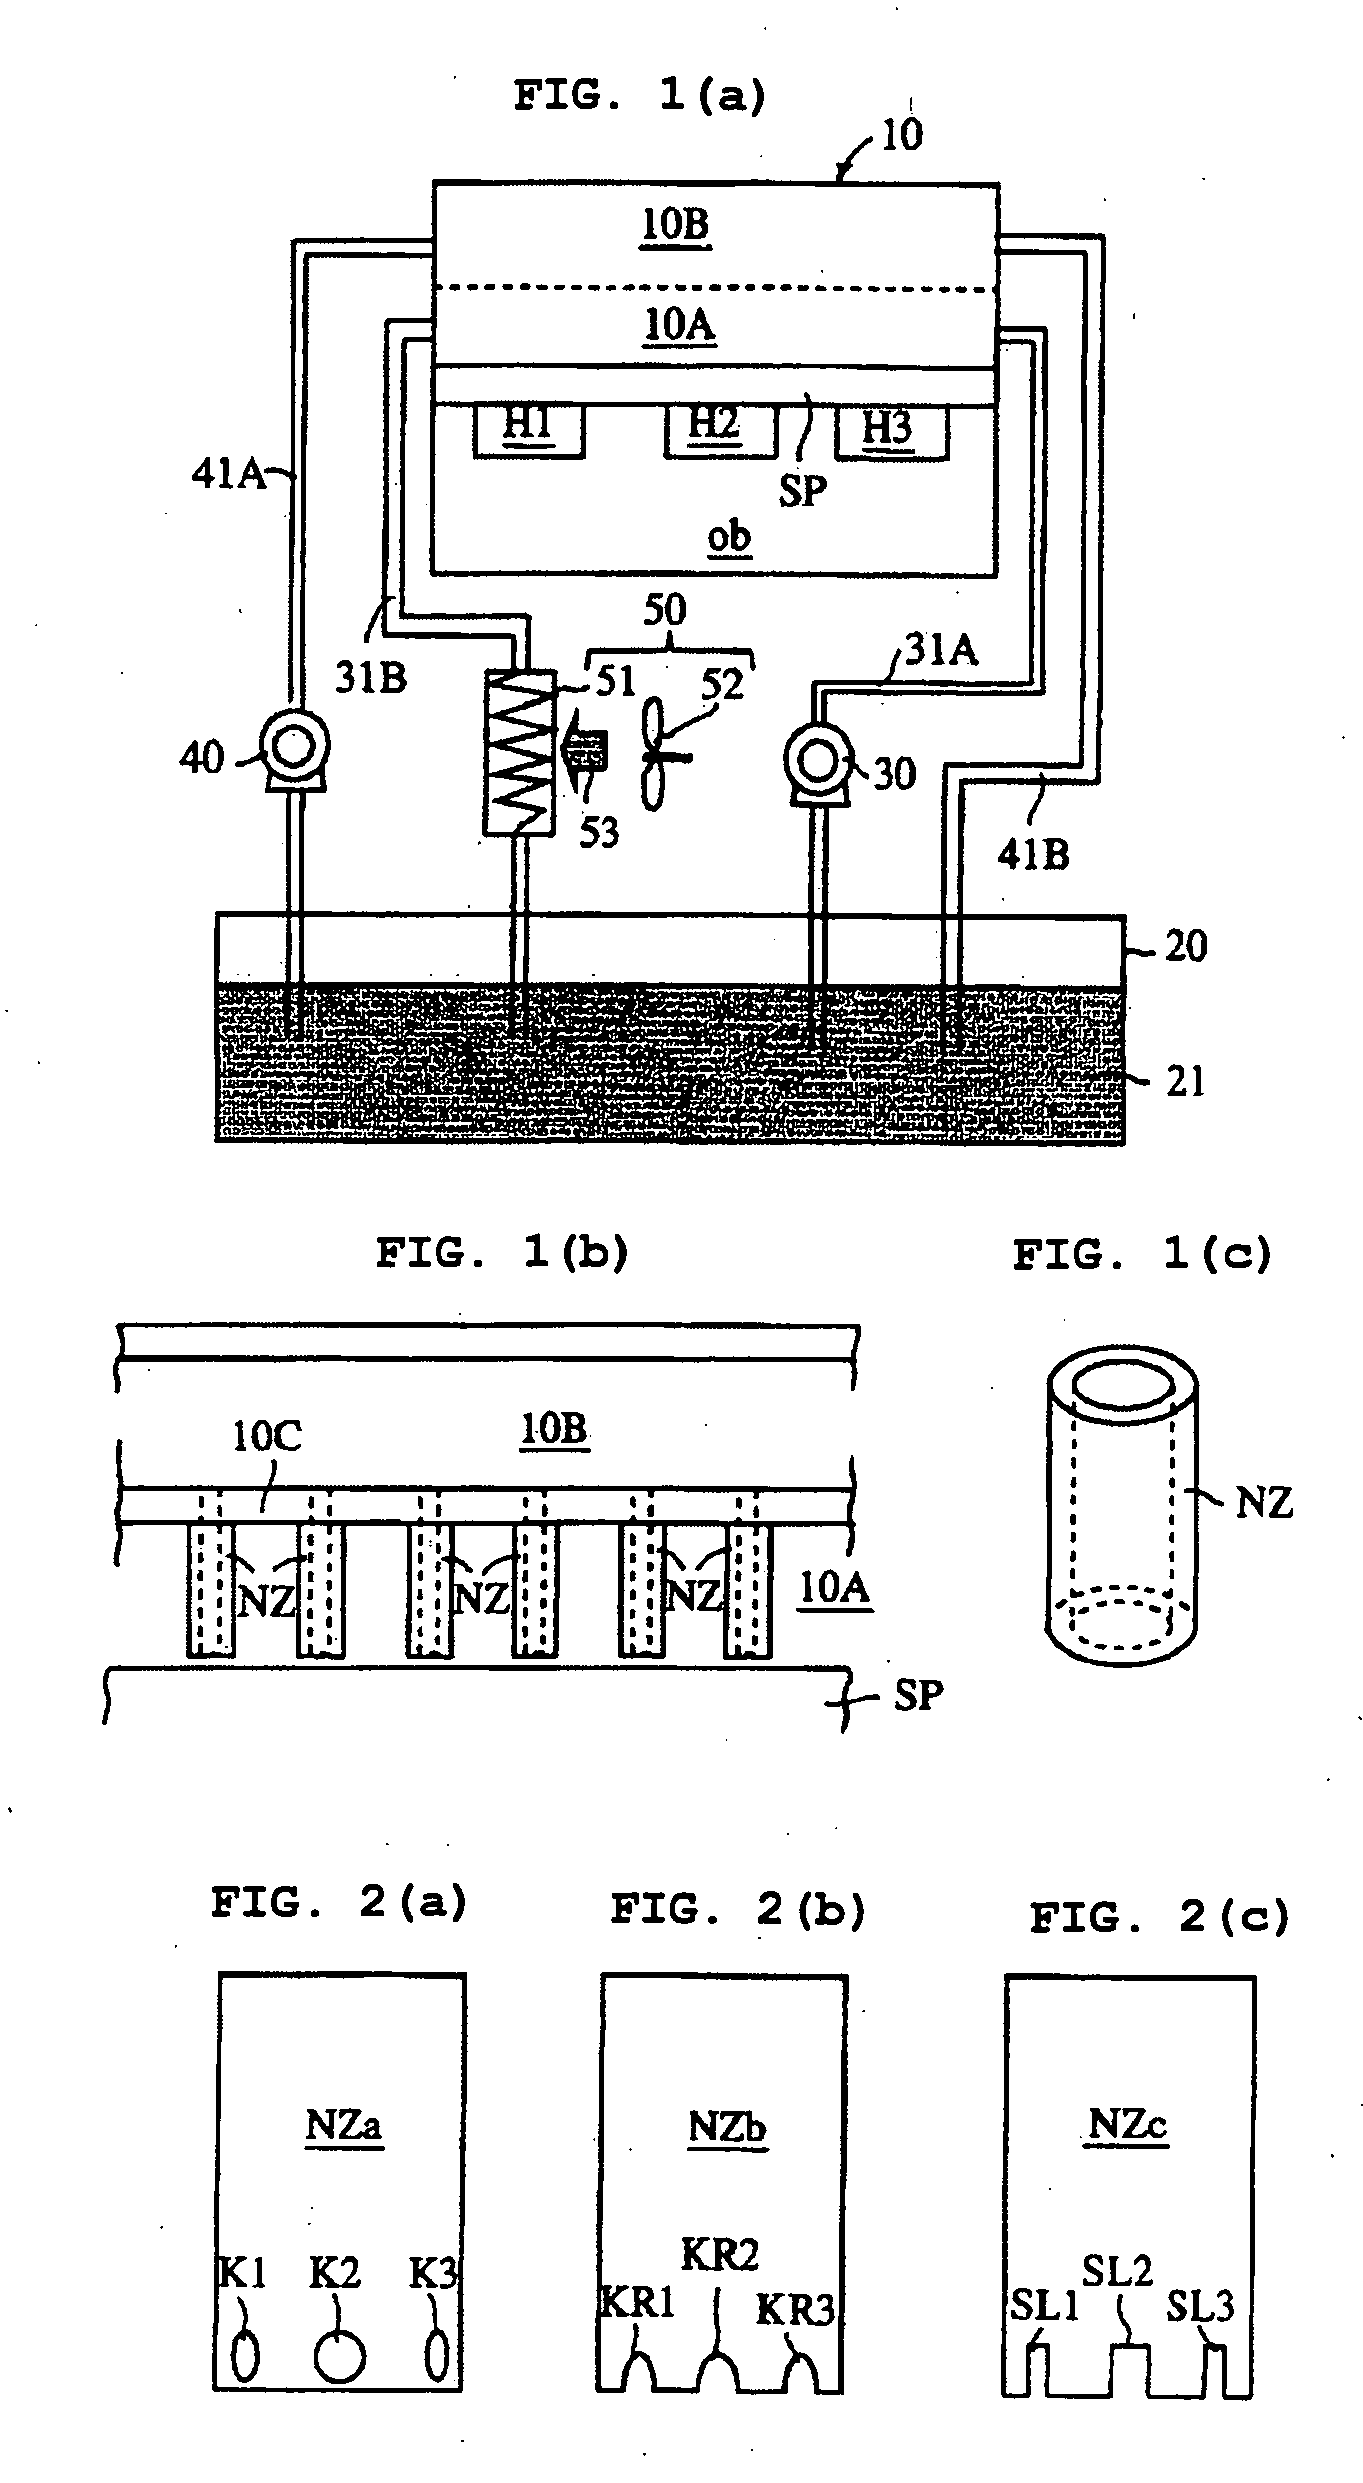 Boil Cooling Method, Boil Cooling Apparatus, Flow Channel Structure, and Applied Technology Field Thereof